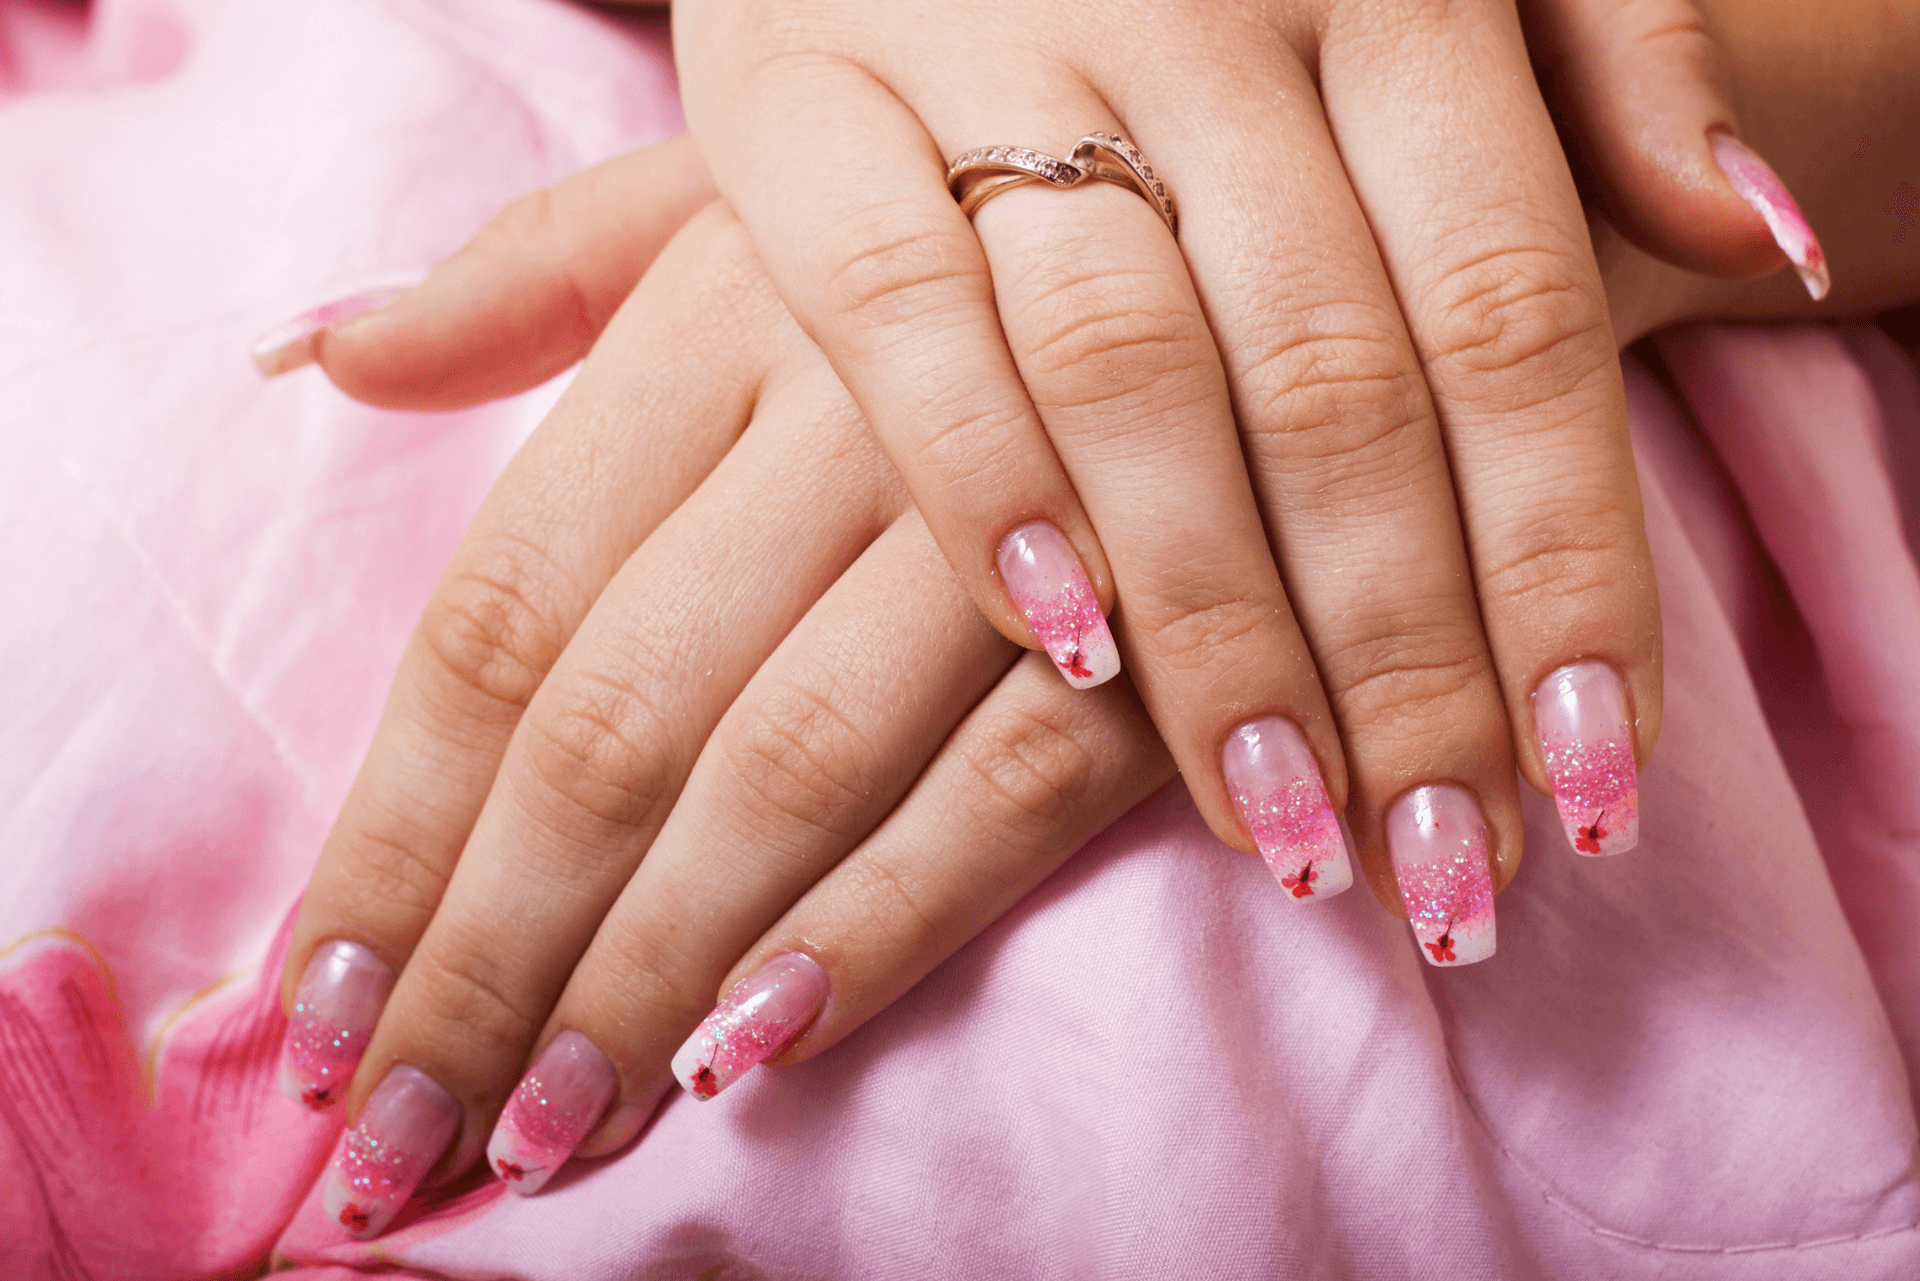 5. Long Nail Designs with Gel - wide 4